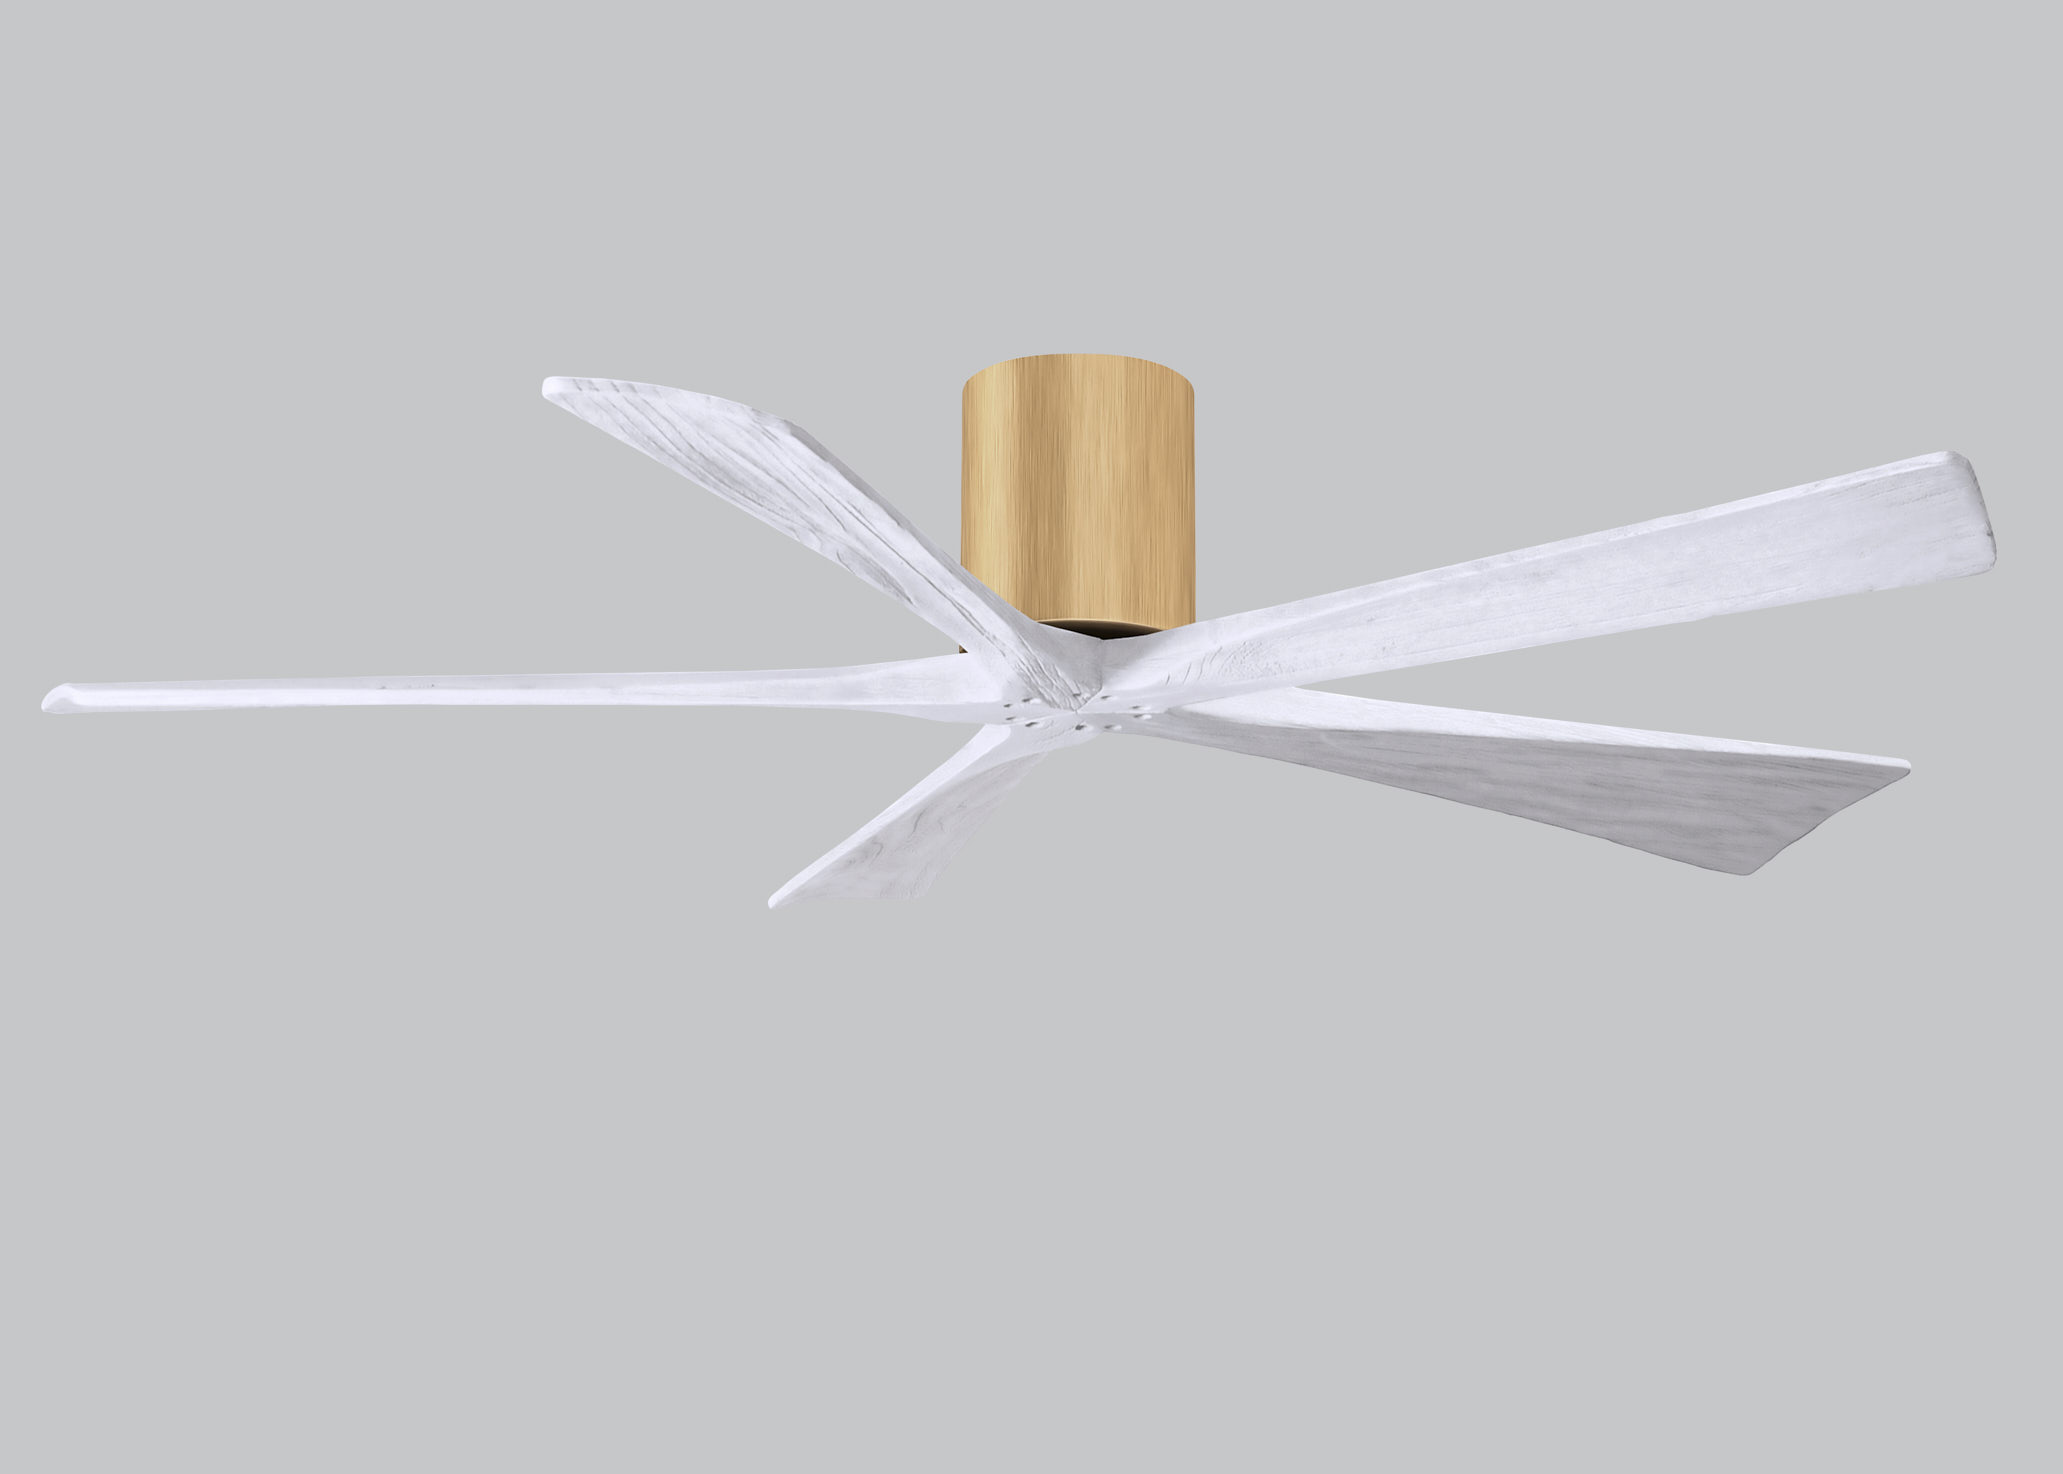 Irene-5H 6-speed ceiling fan in light maple finish with 60